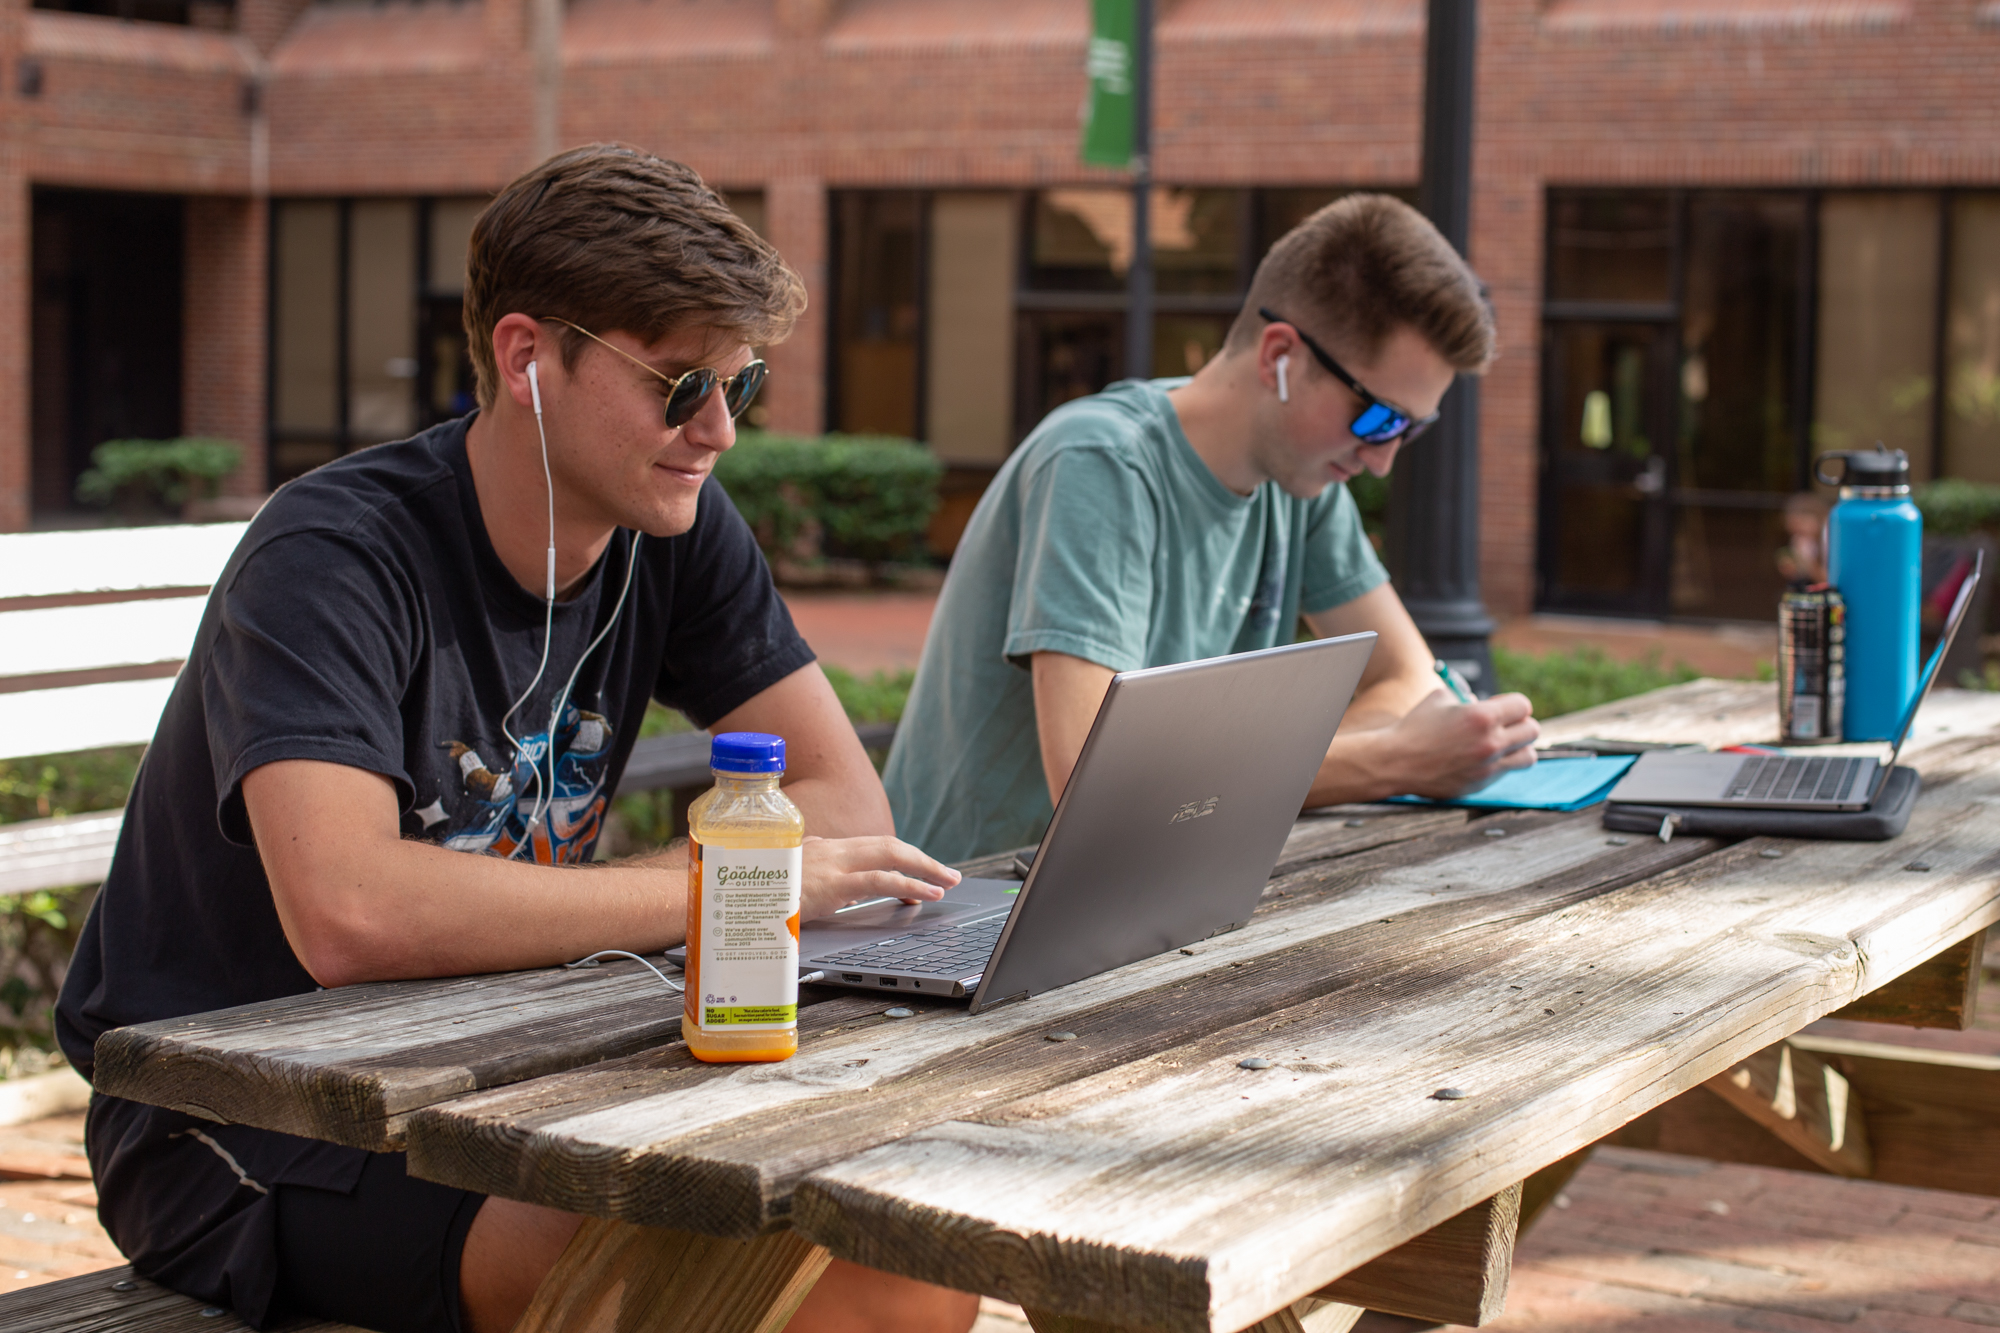 Two students on laptops sitting outdoors at a picnic table